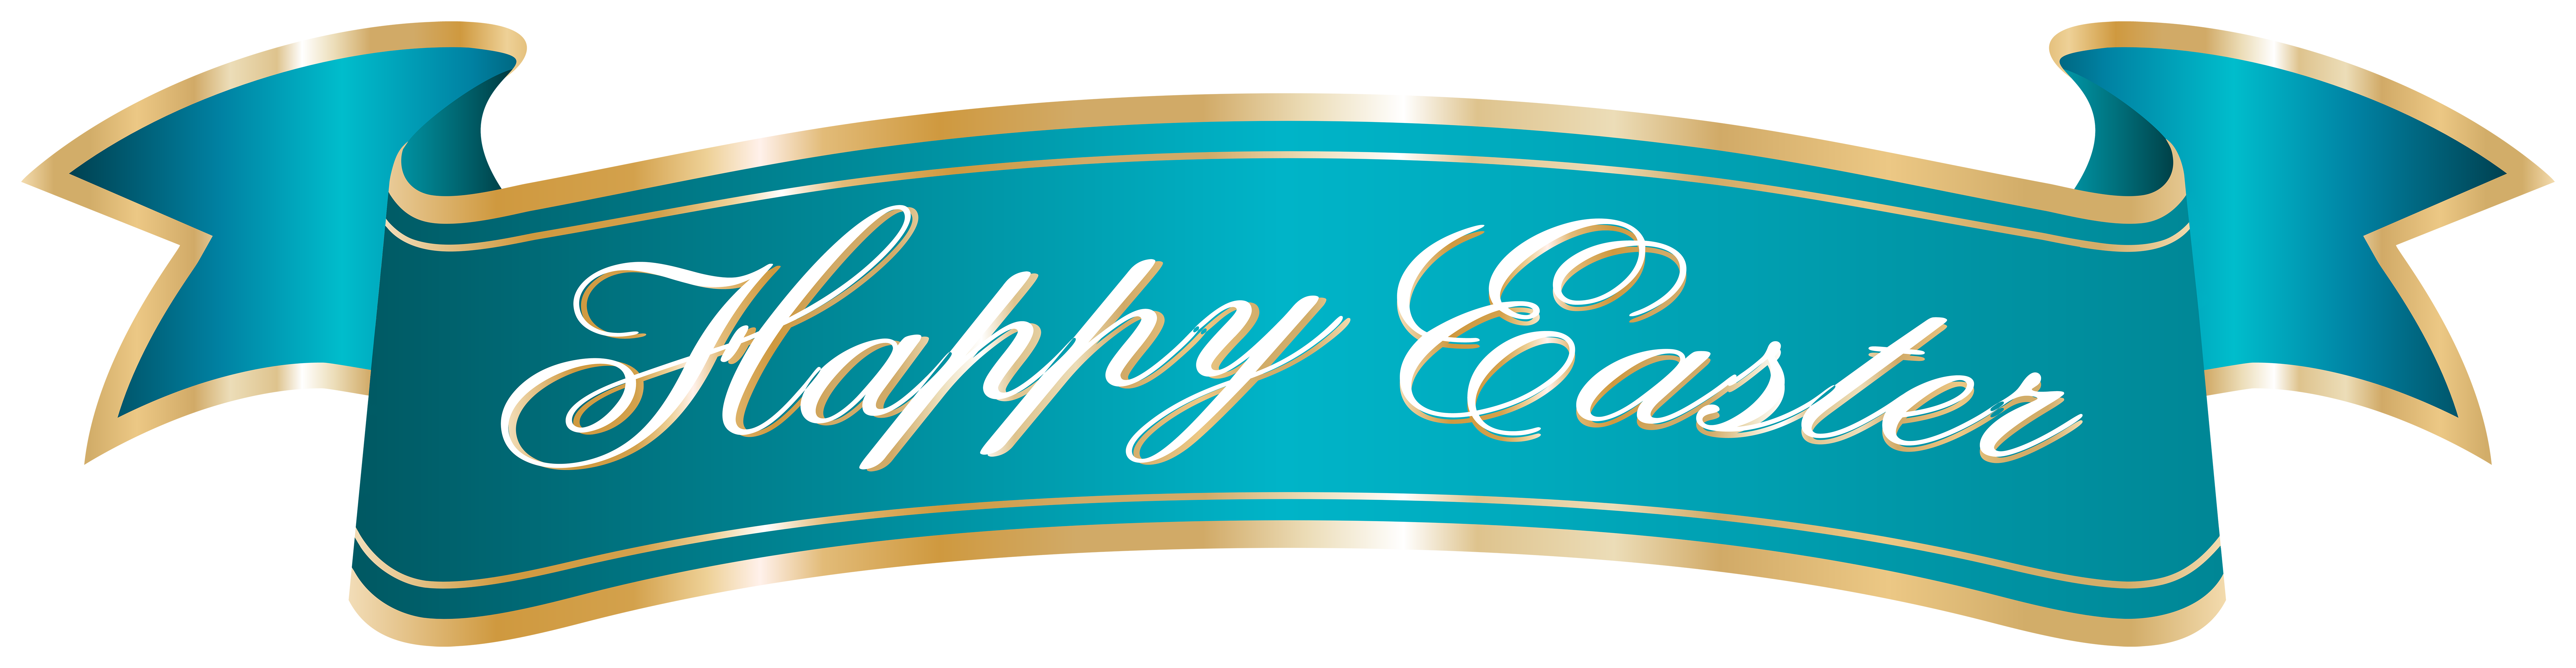 free easter banner clipart - photo #8